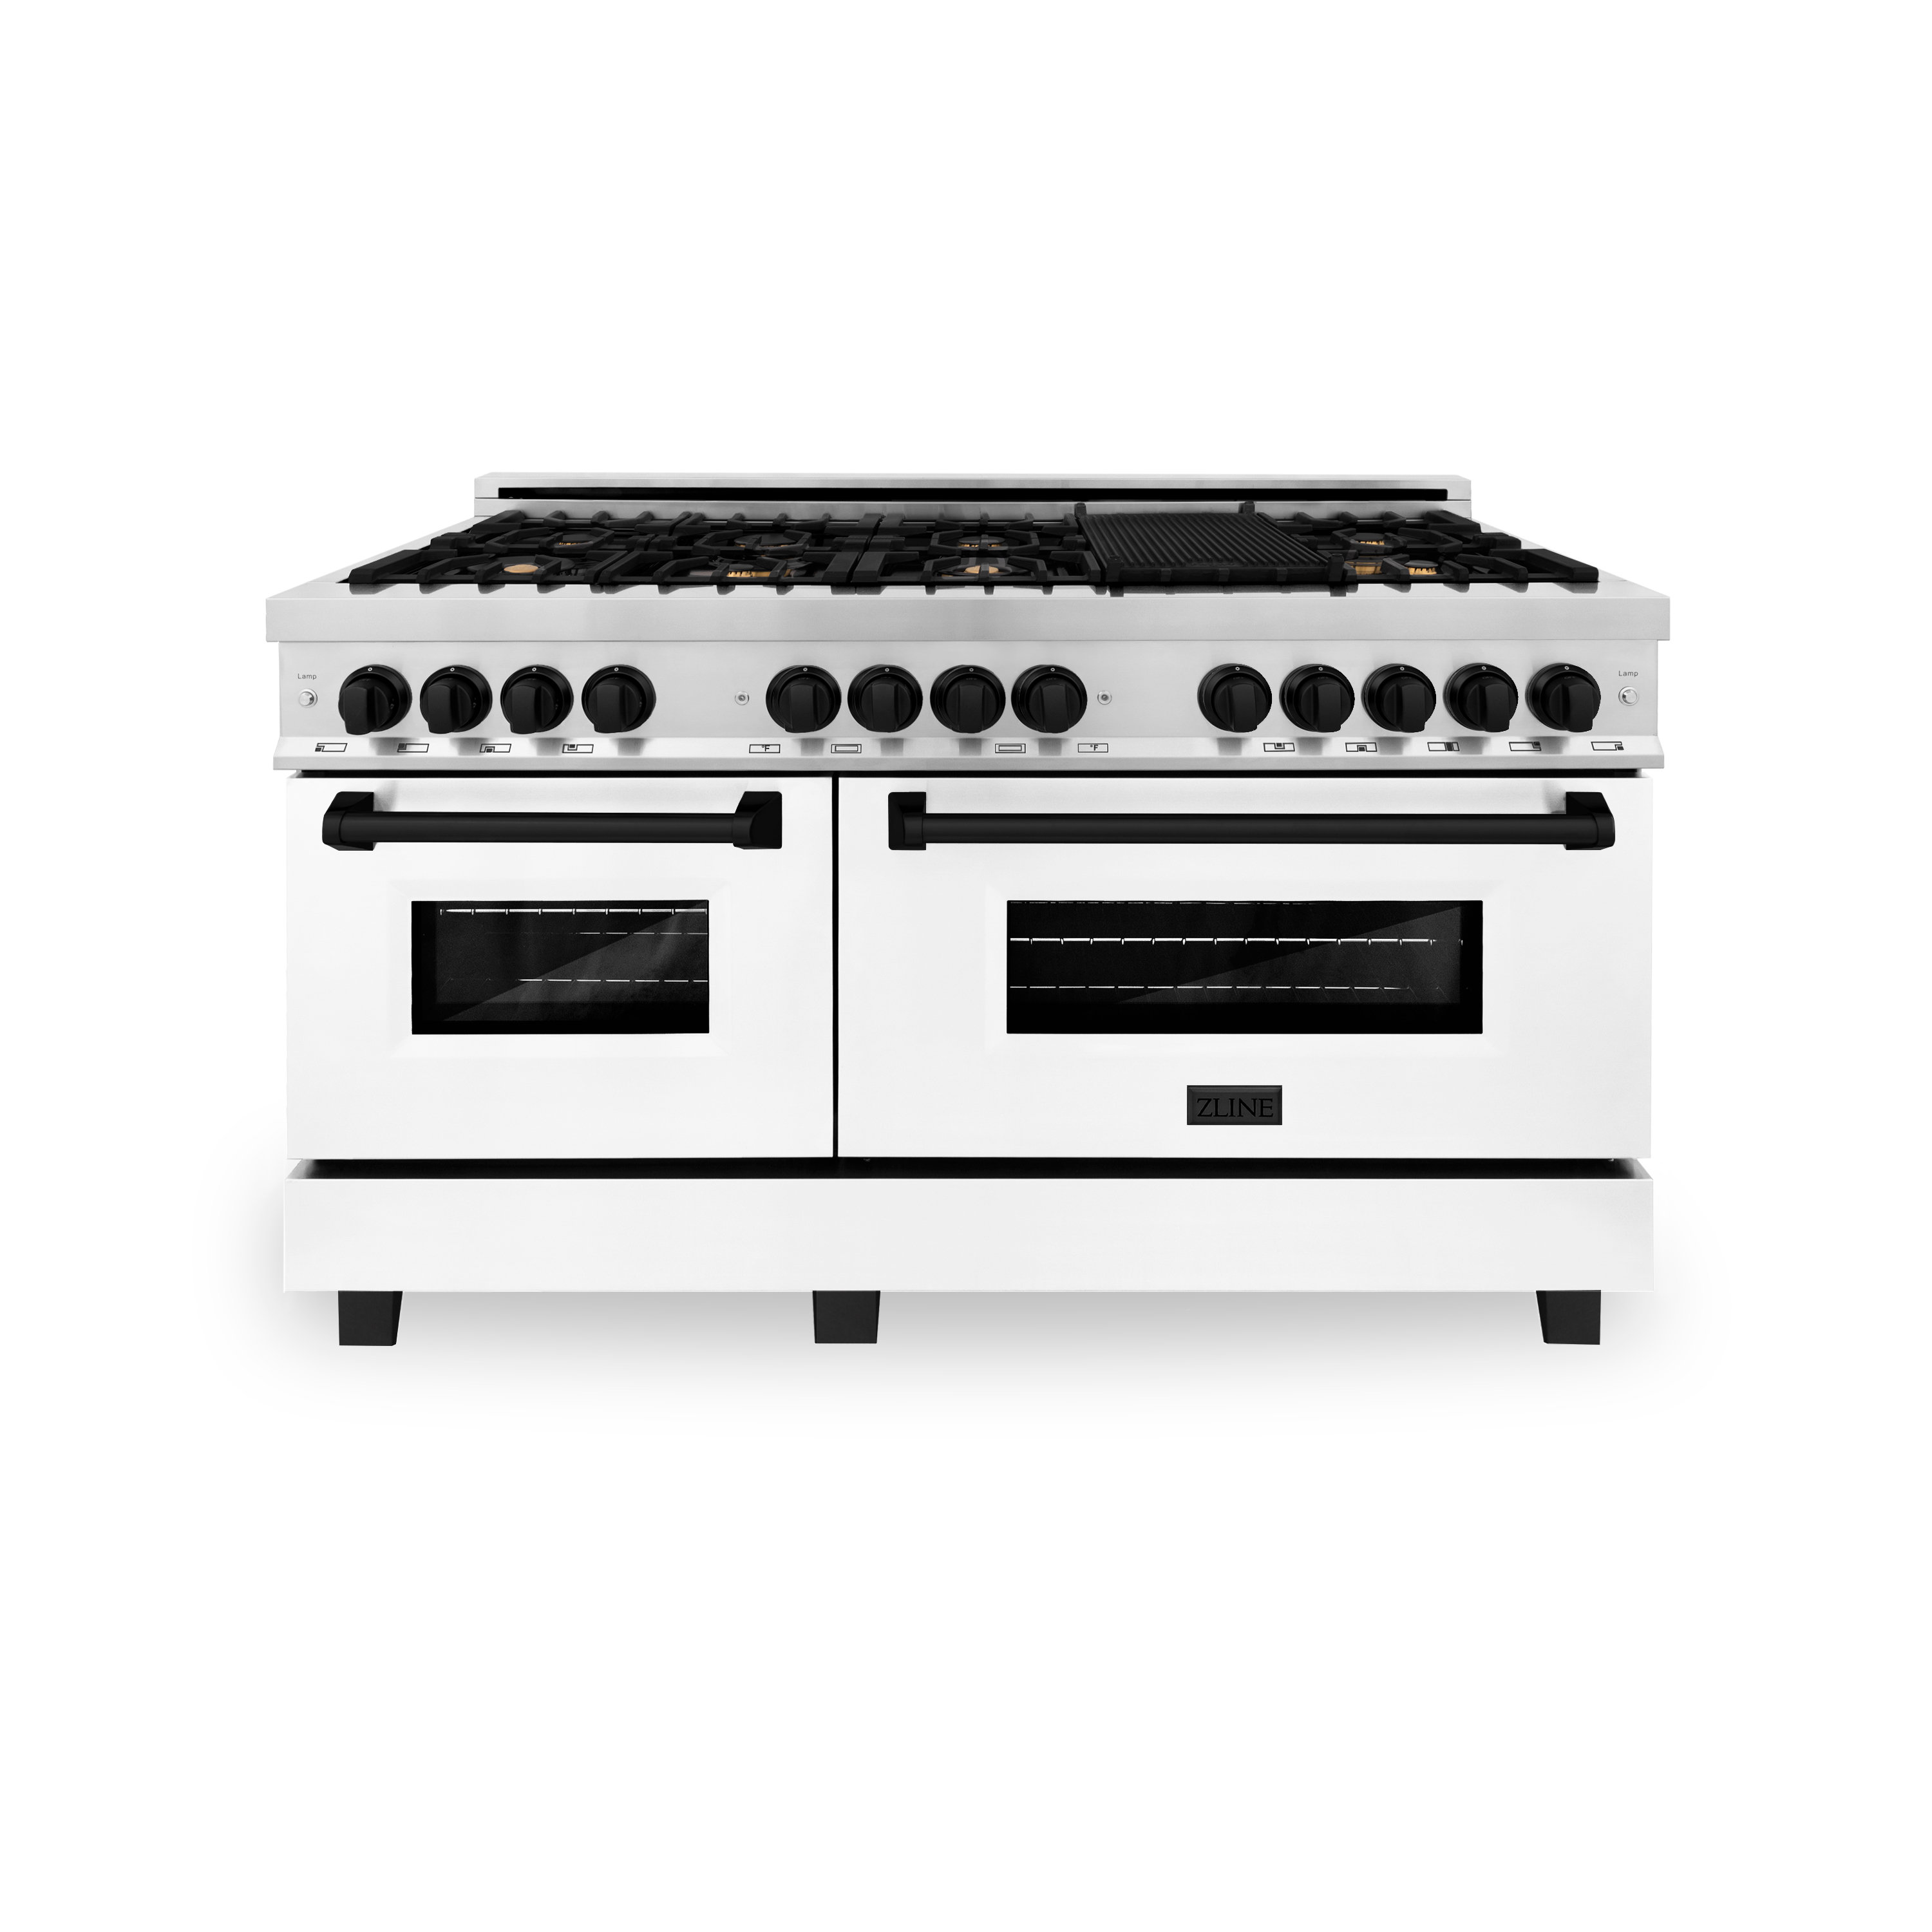 ZLINE Autograph 48 in. Gas Burner/Electric Oven Range in Black Stainless  Steel and Gold Accents, RABZ-48-G